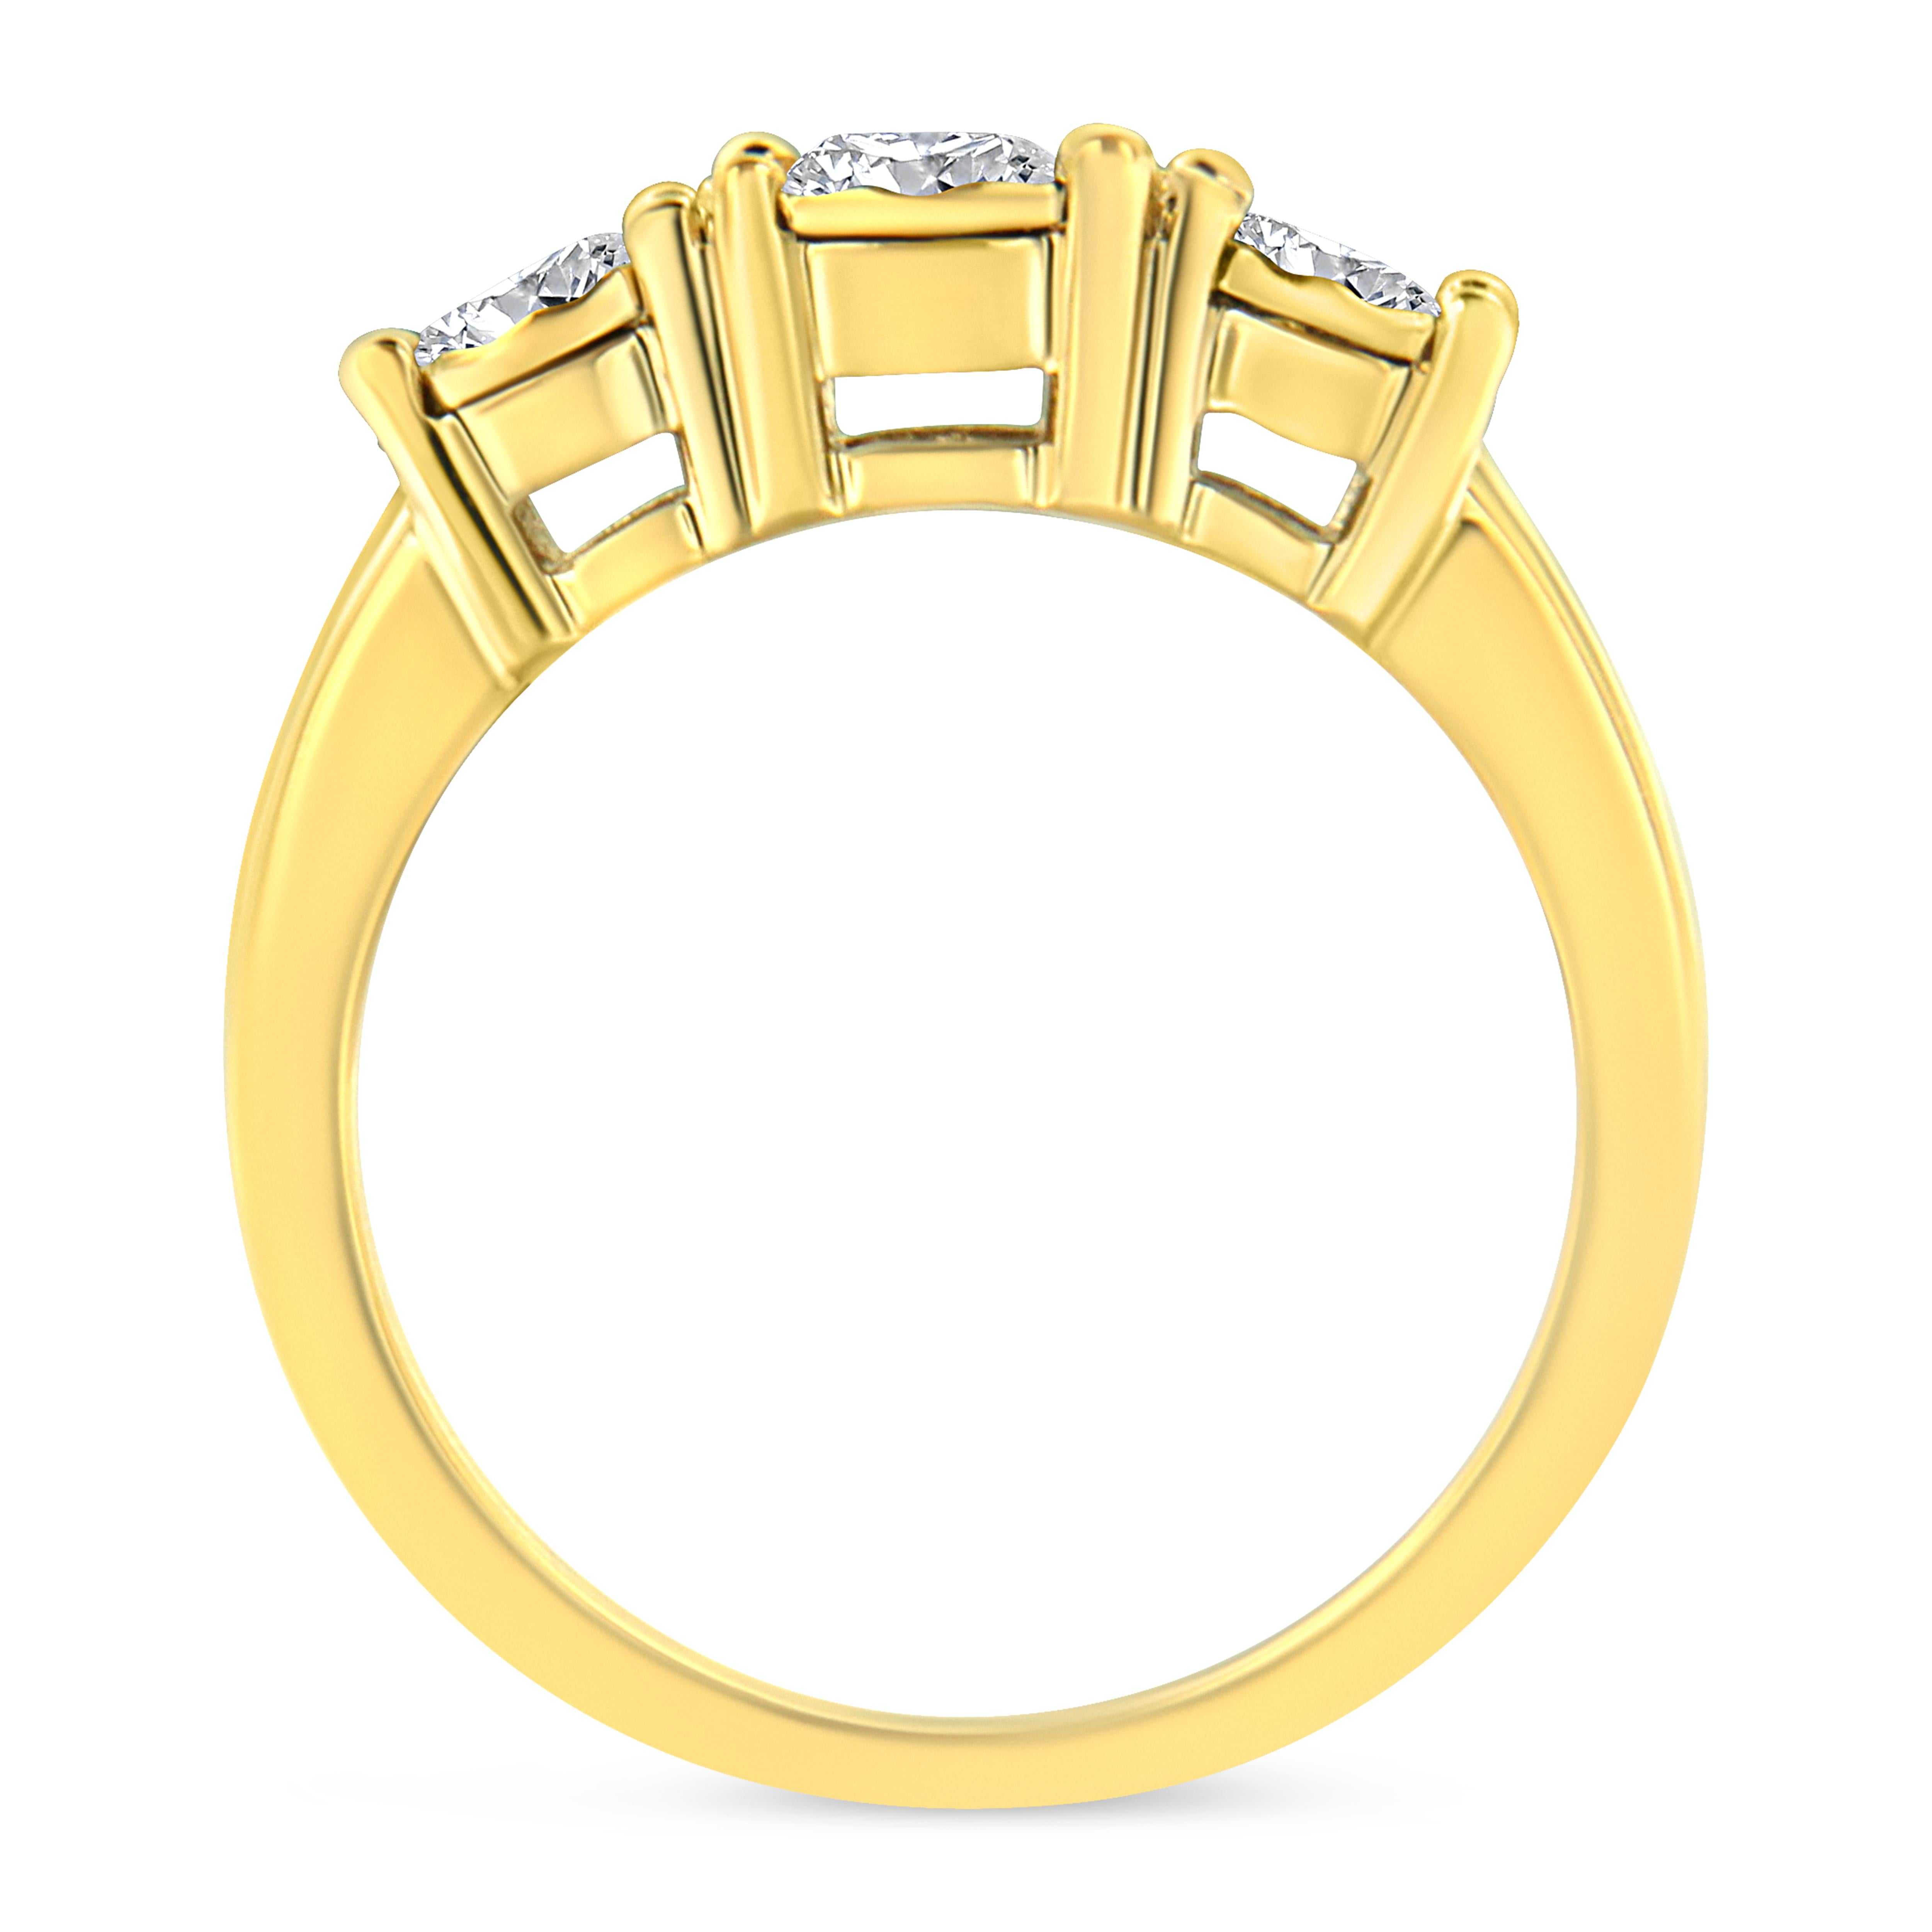 Elegant and timeless, this engagement ring is reimagined with a three stone setting in beautiful, shining .925 sterling silver plated with 14k yellow gold. A round-cut diamond sits at the center of this piece, flanked by two smaller round-cut